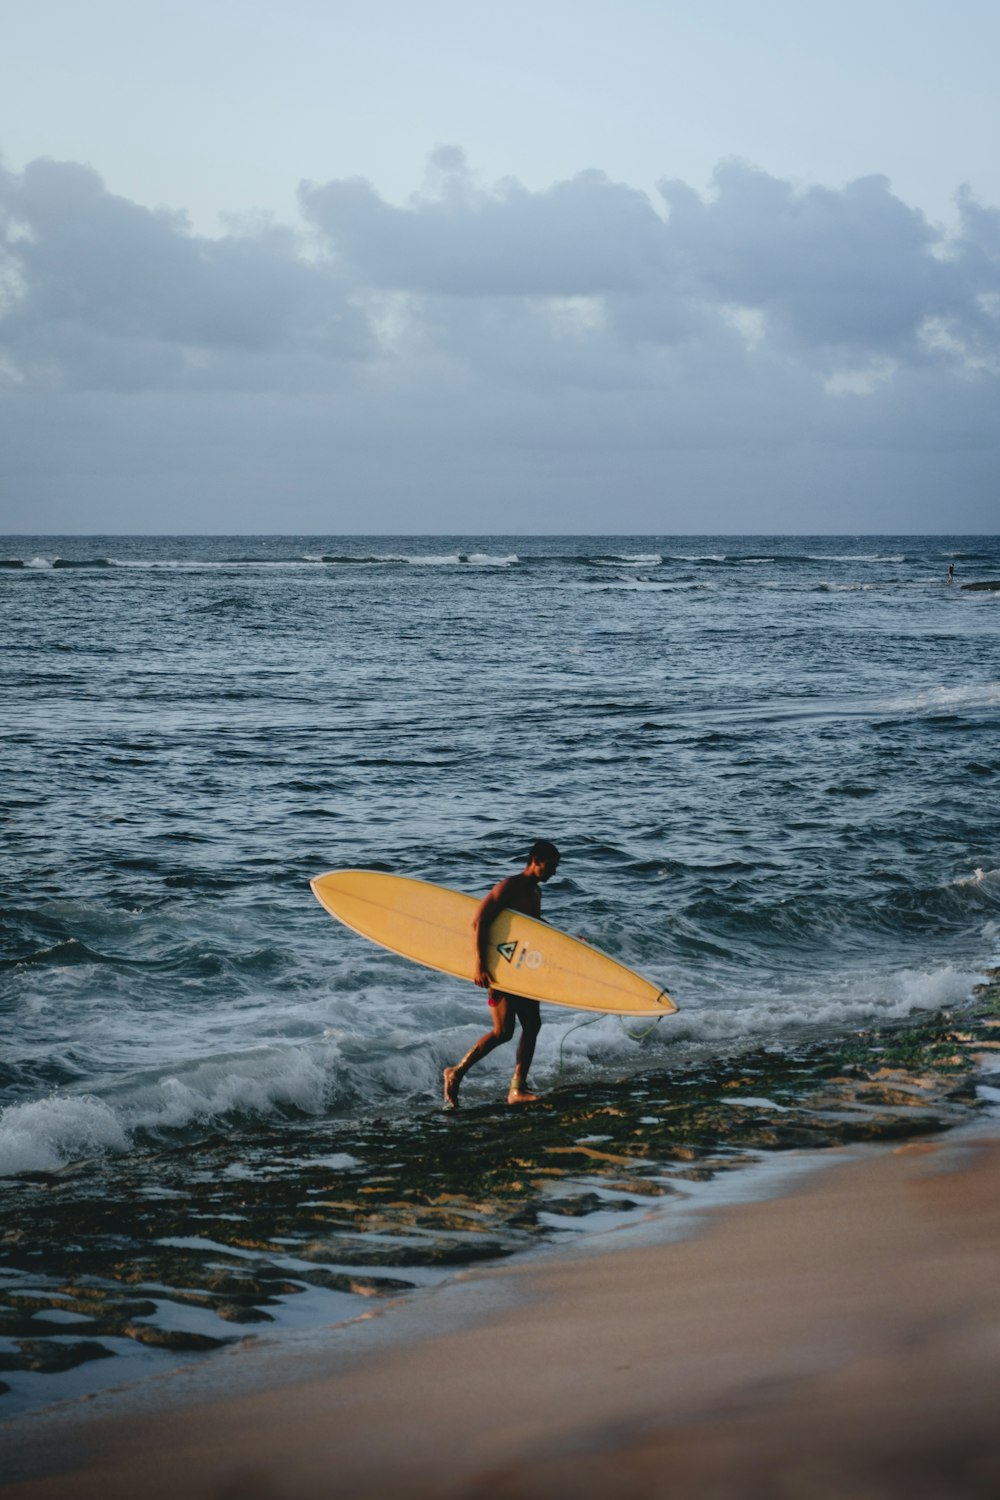 a man holding a yellow surfboard walking into the ocean